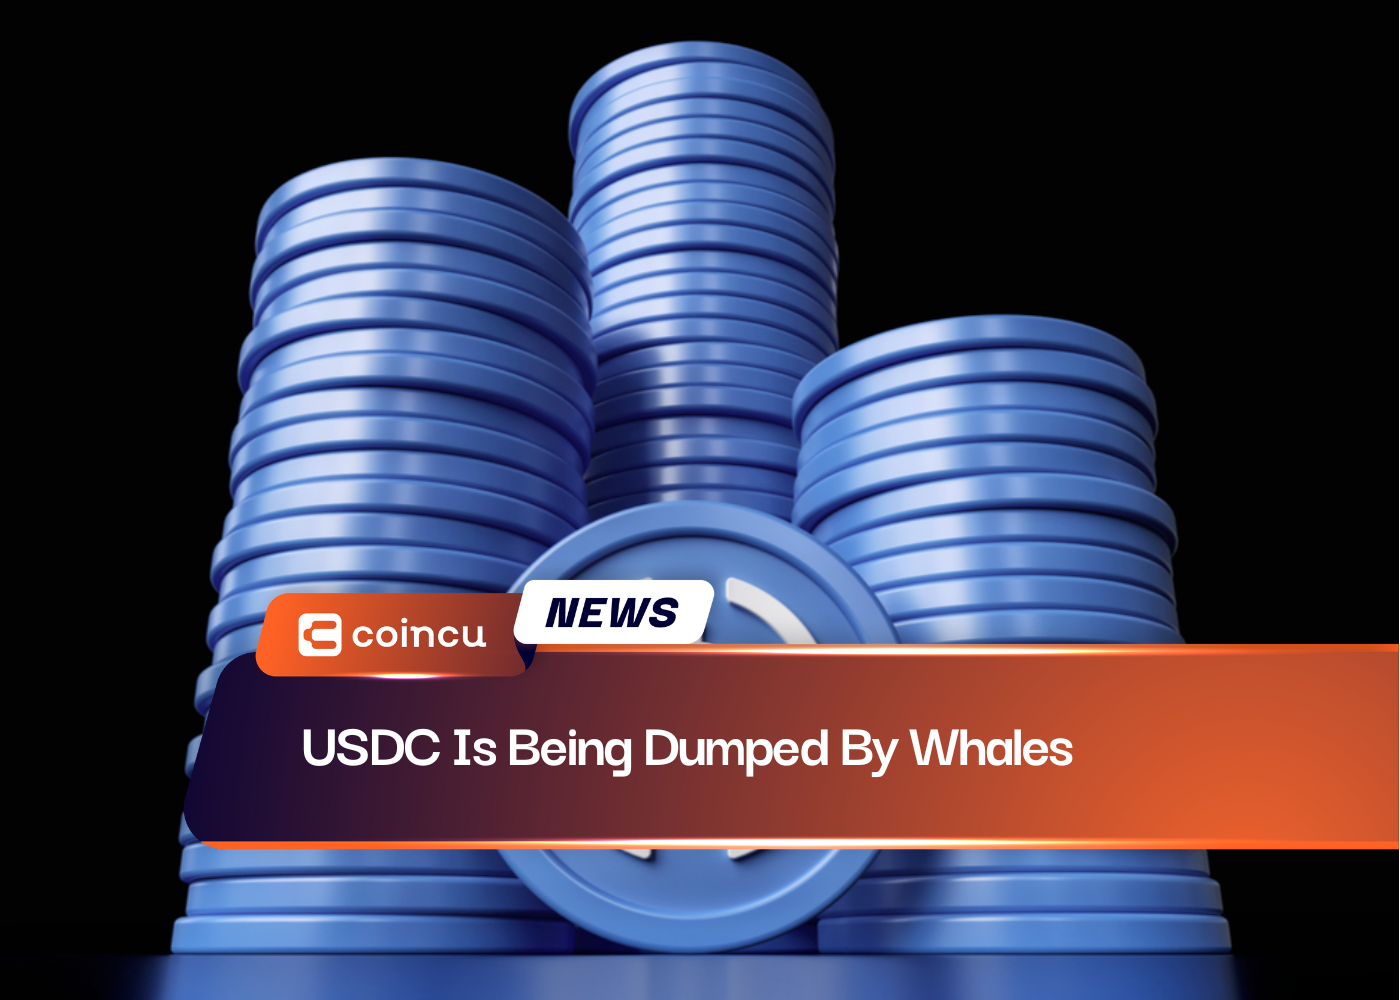 USDC Is Being Dumped By Whales